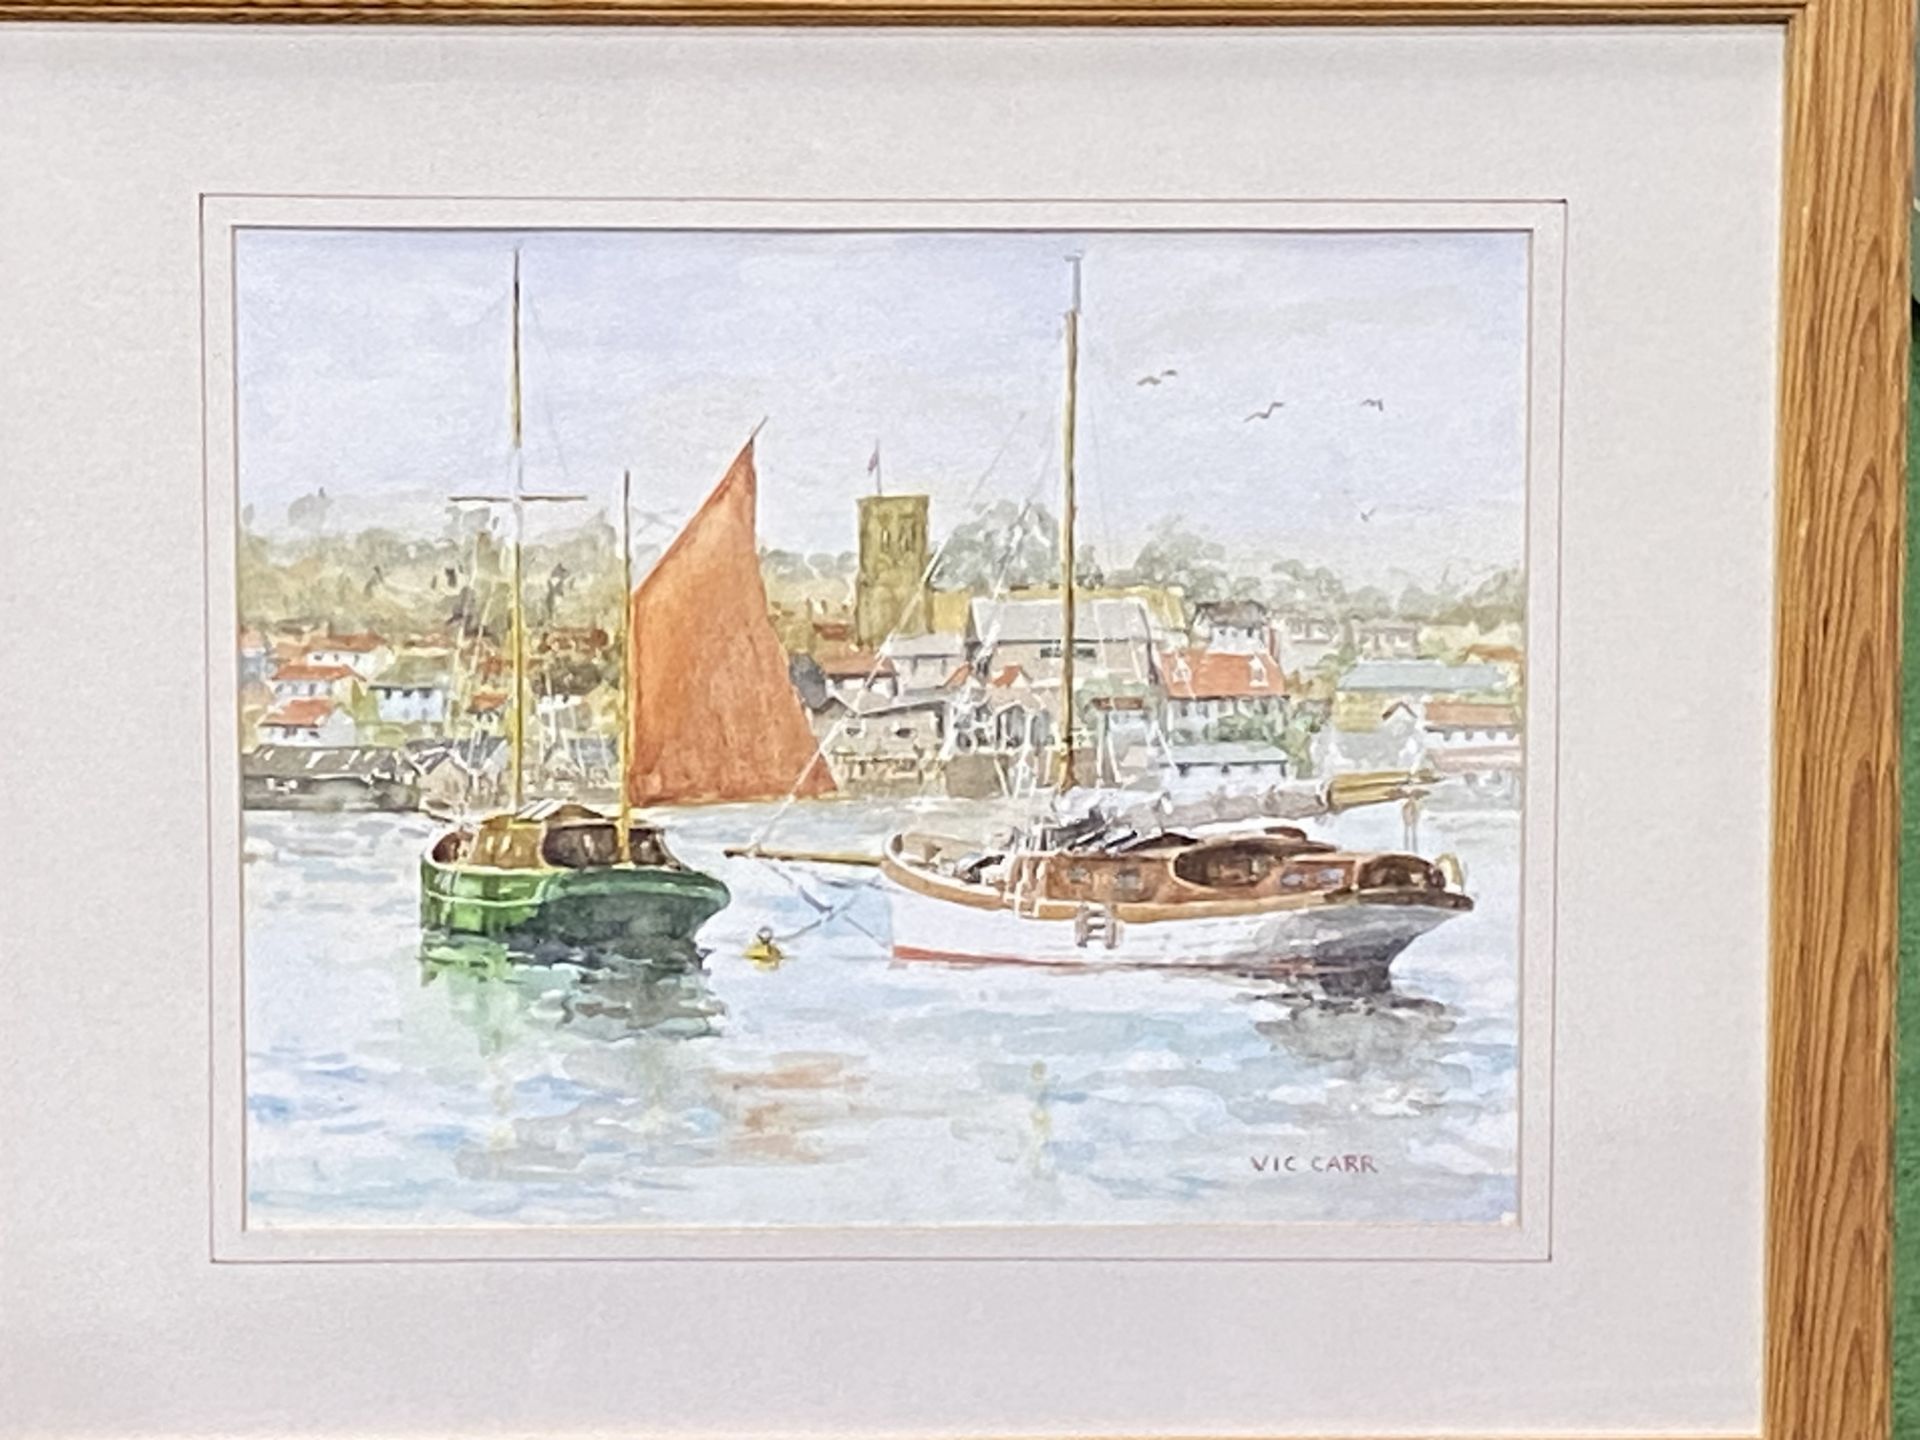 Framed and glazed watercolour, signed Vic Carr - Bild 4 aus 4